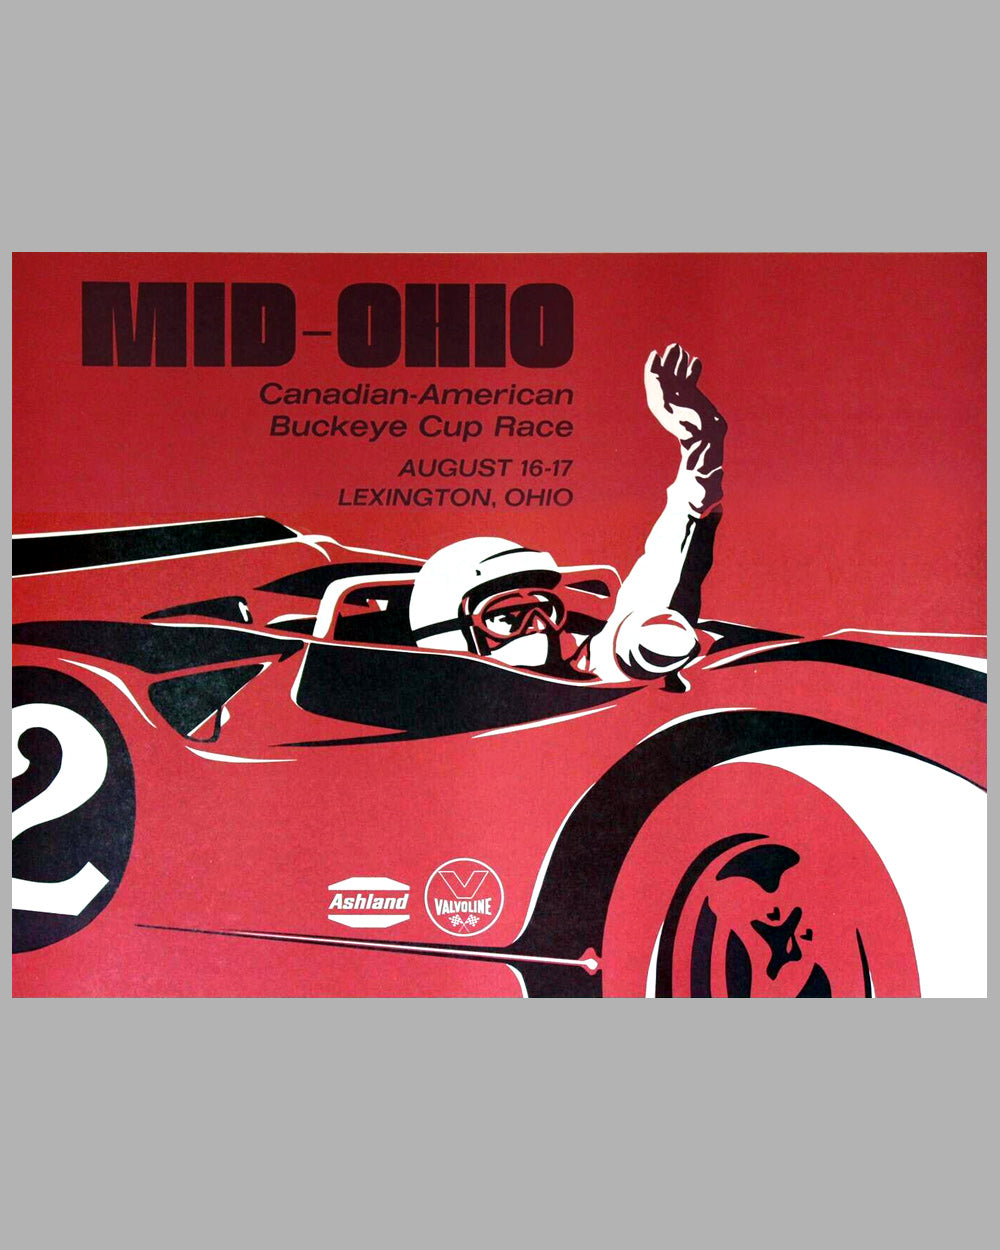 1969 Mid-Ohio Can-Am Buckeye Cup Race original event poster